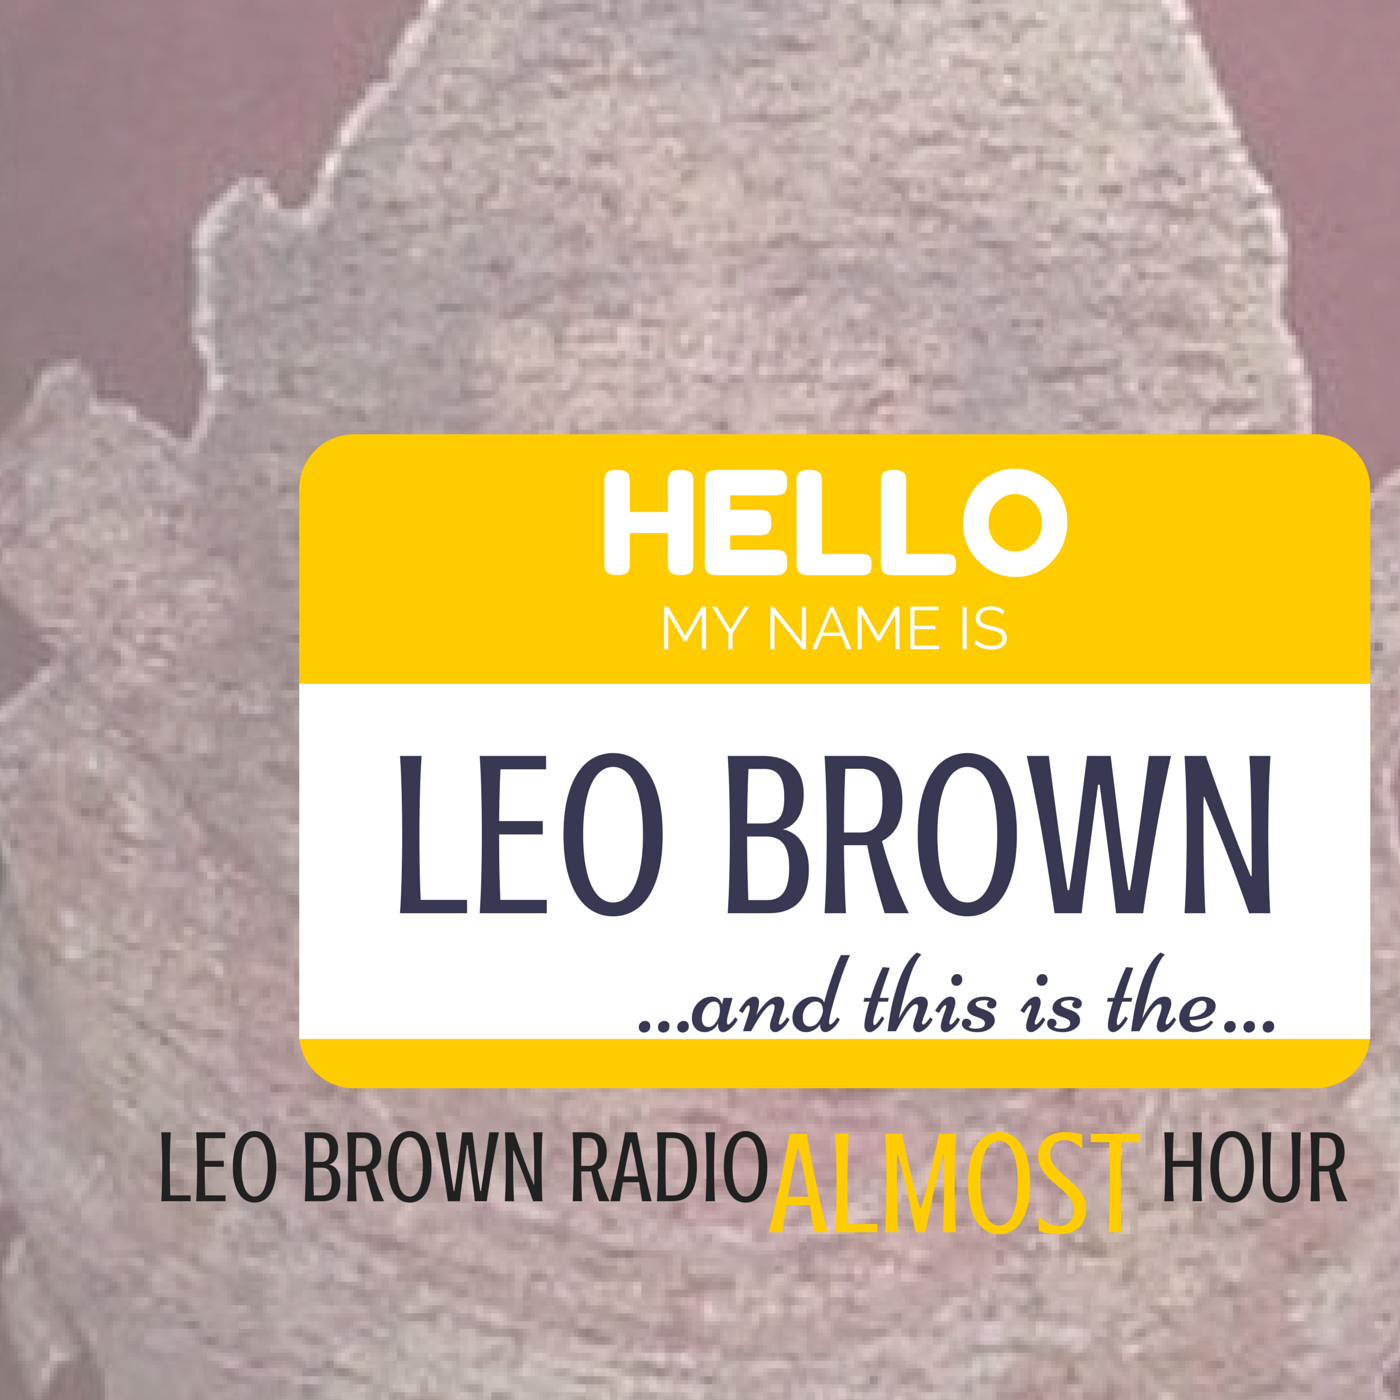 Leo Brown Almost Hour 4/13/17